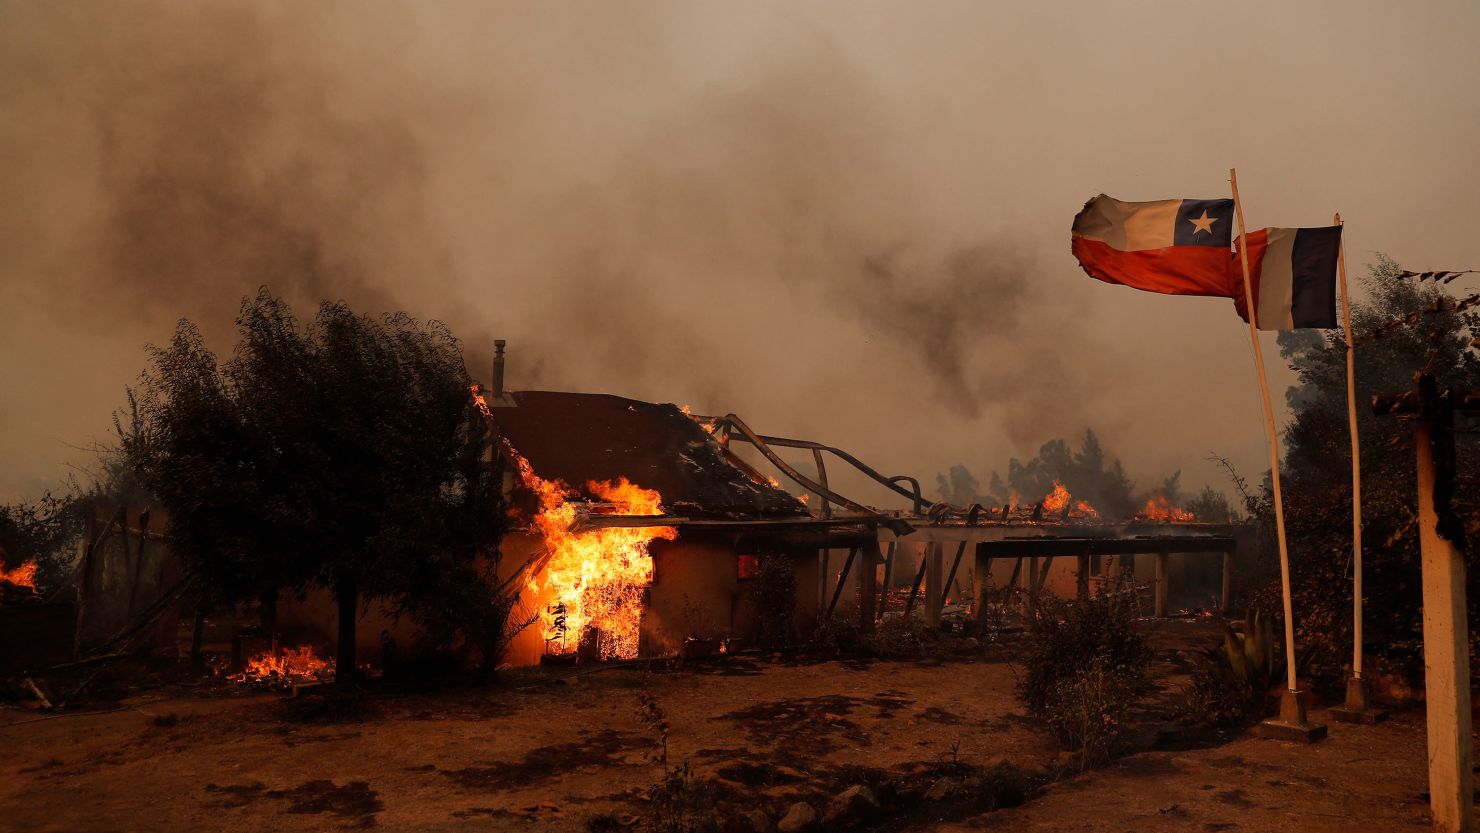 Flames consume a house during a fire in Santa Juana, Concepcion province, Chile on February 3, 2023.